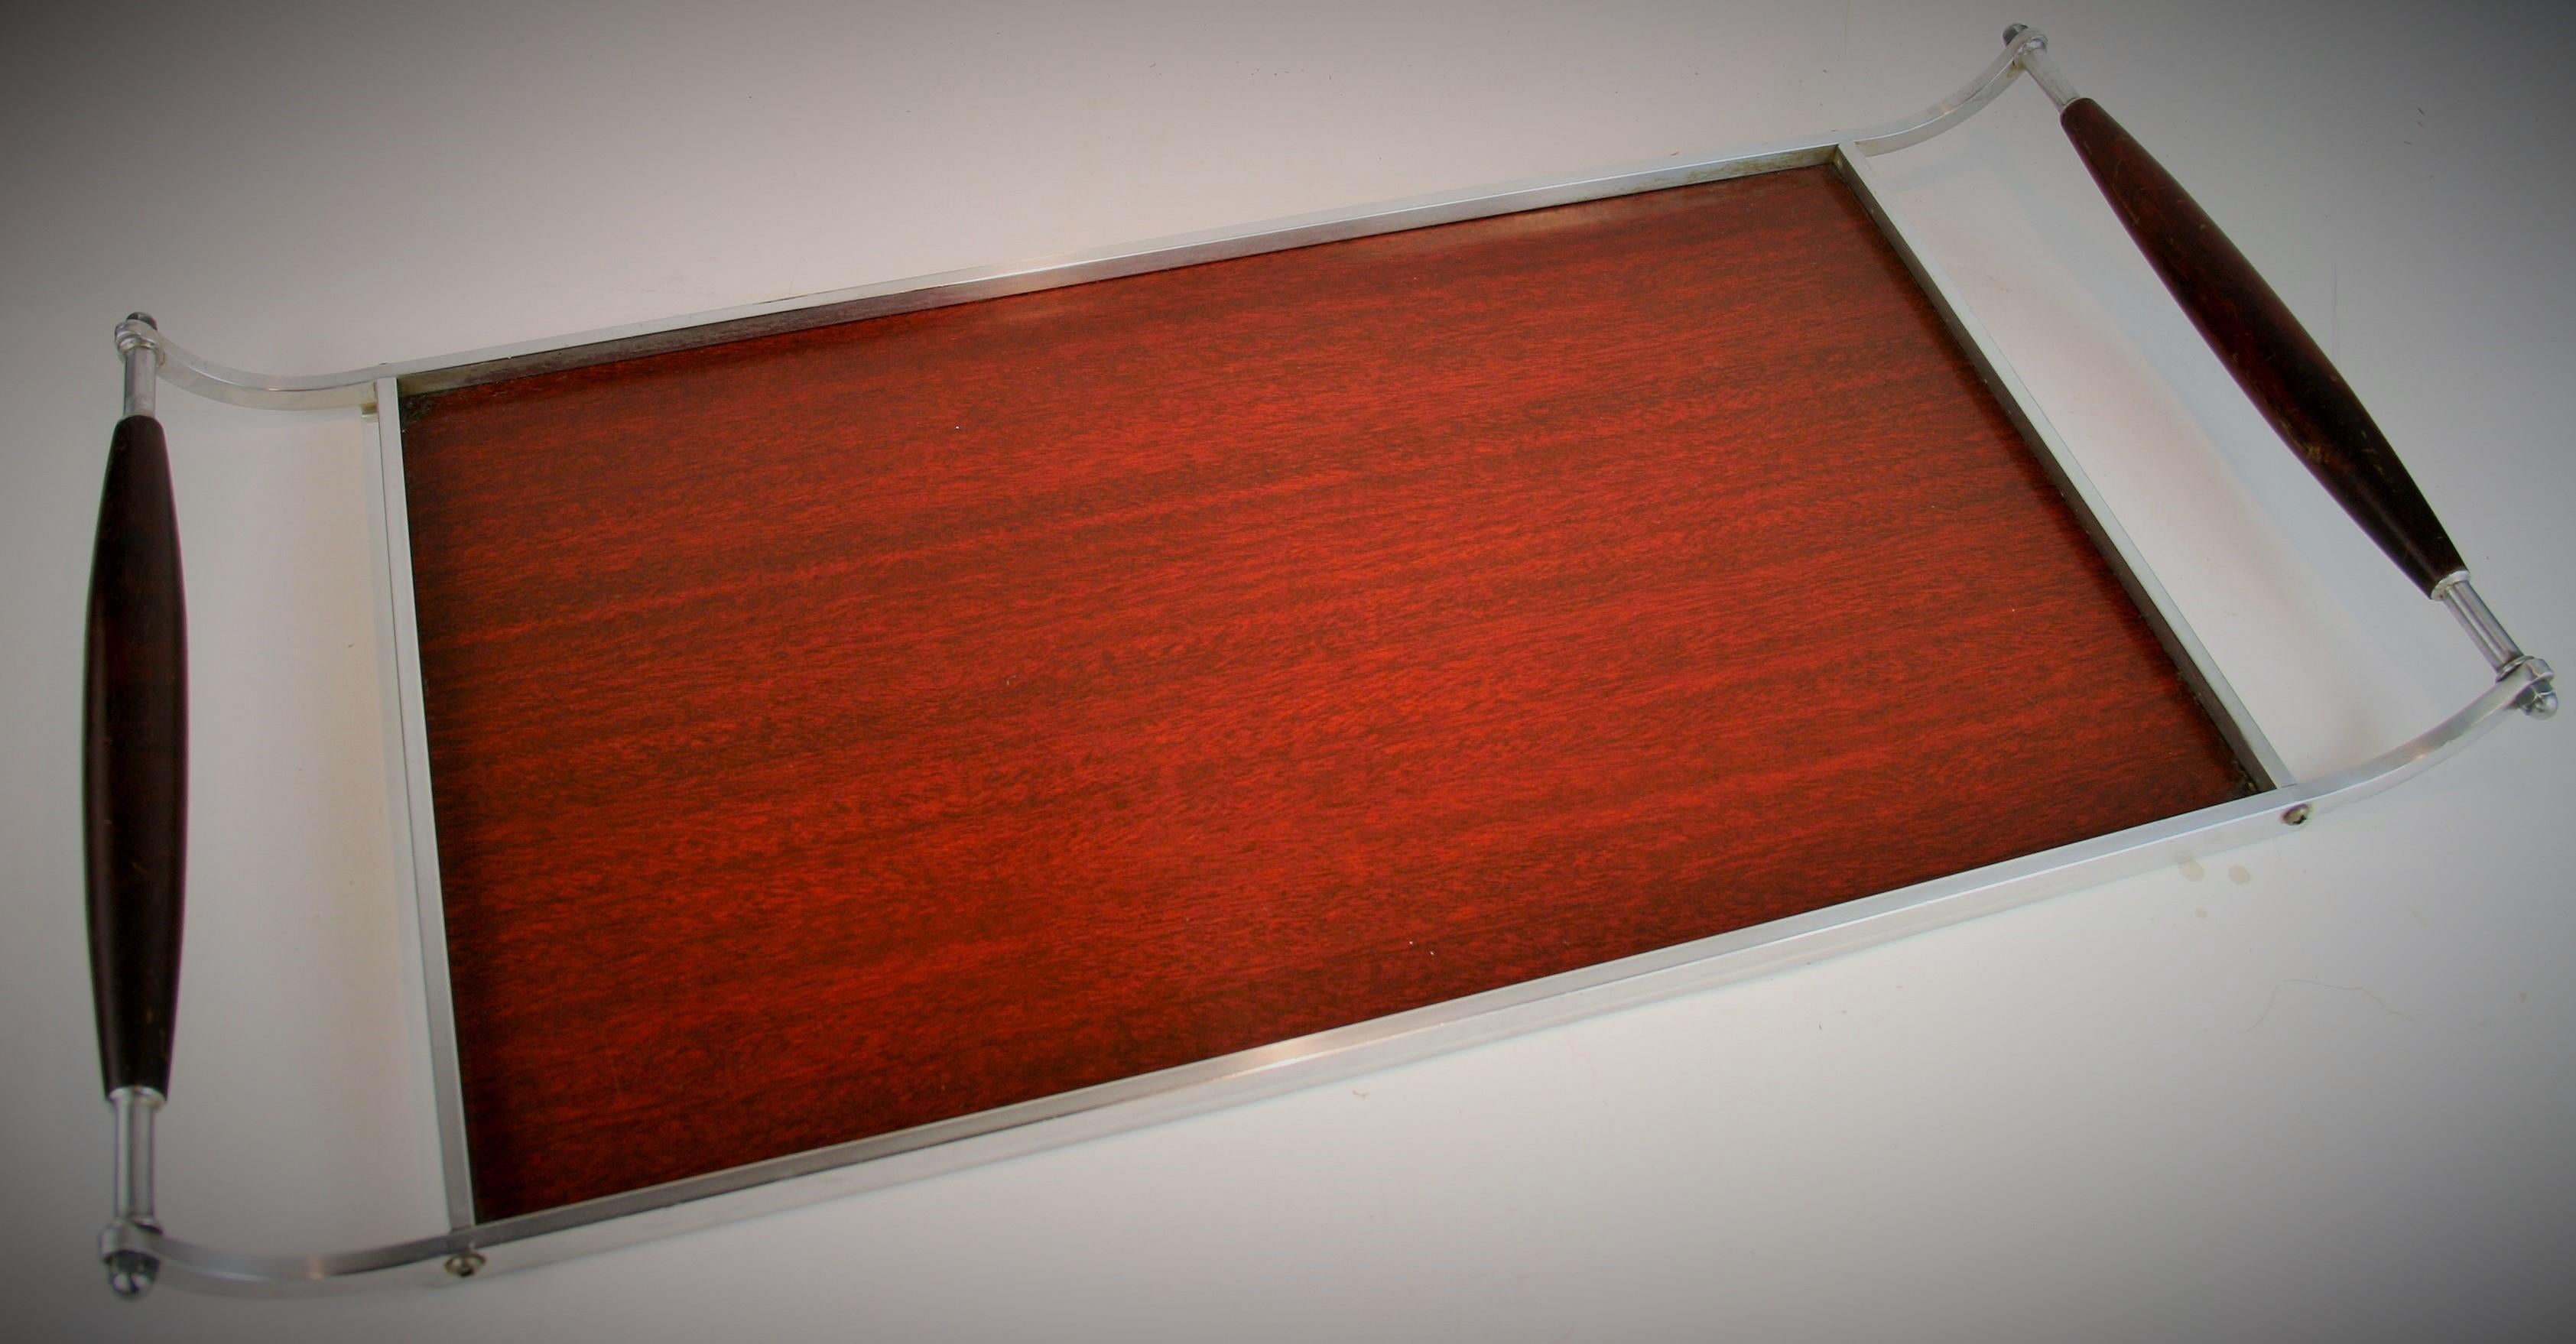 3-448, midcentury industrial design aluminum and walnut serving tray with laminate surface.